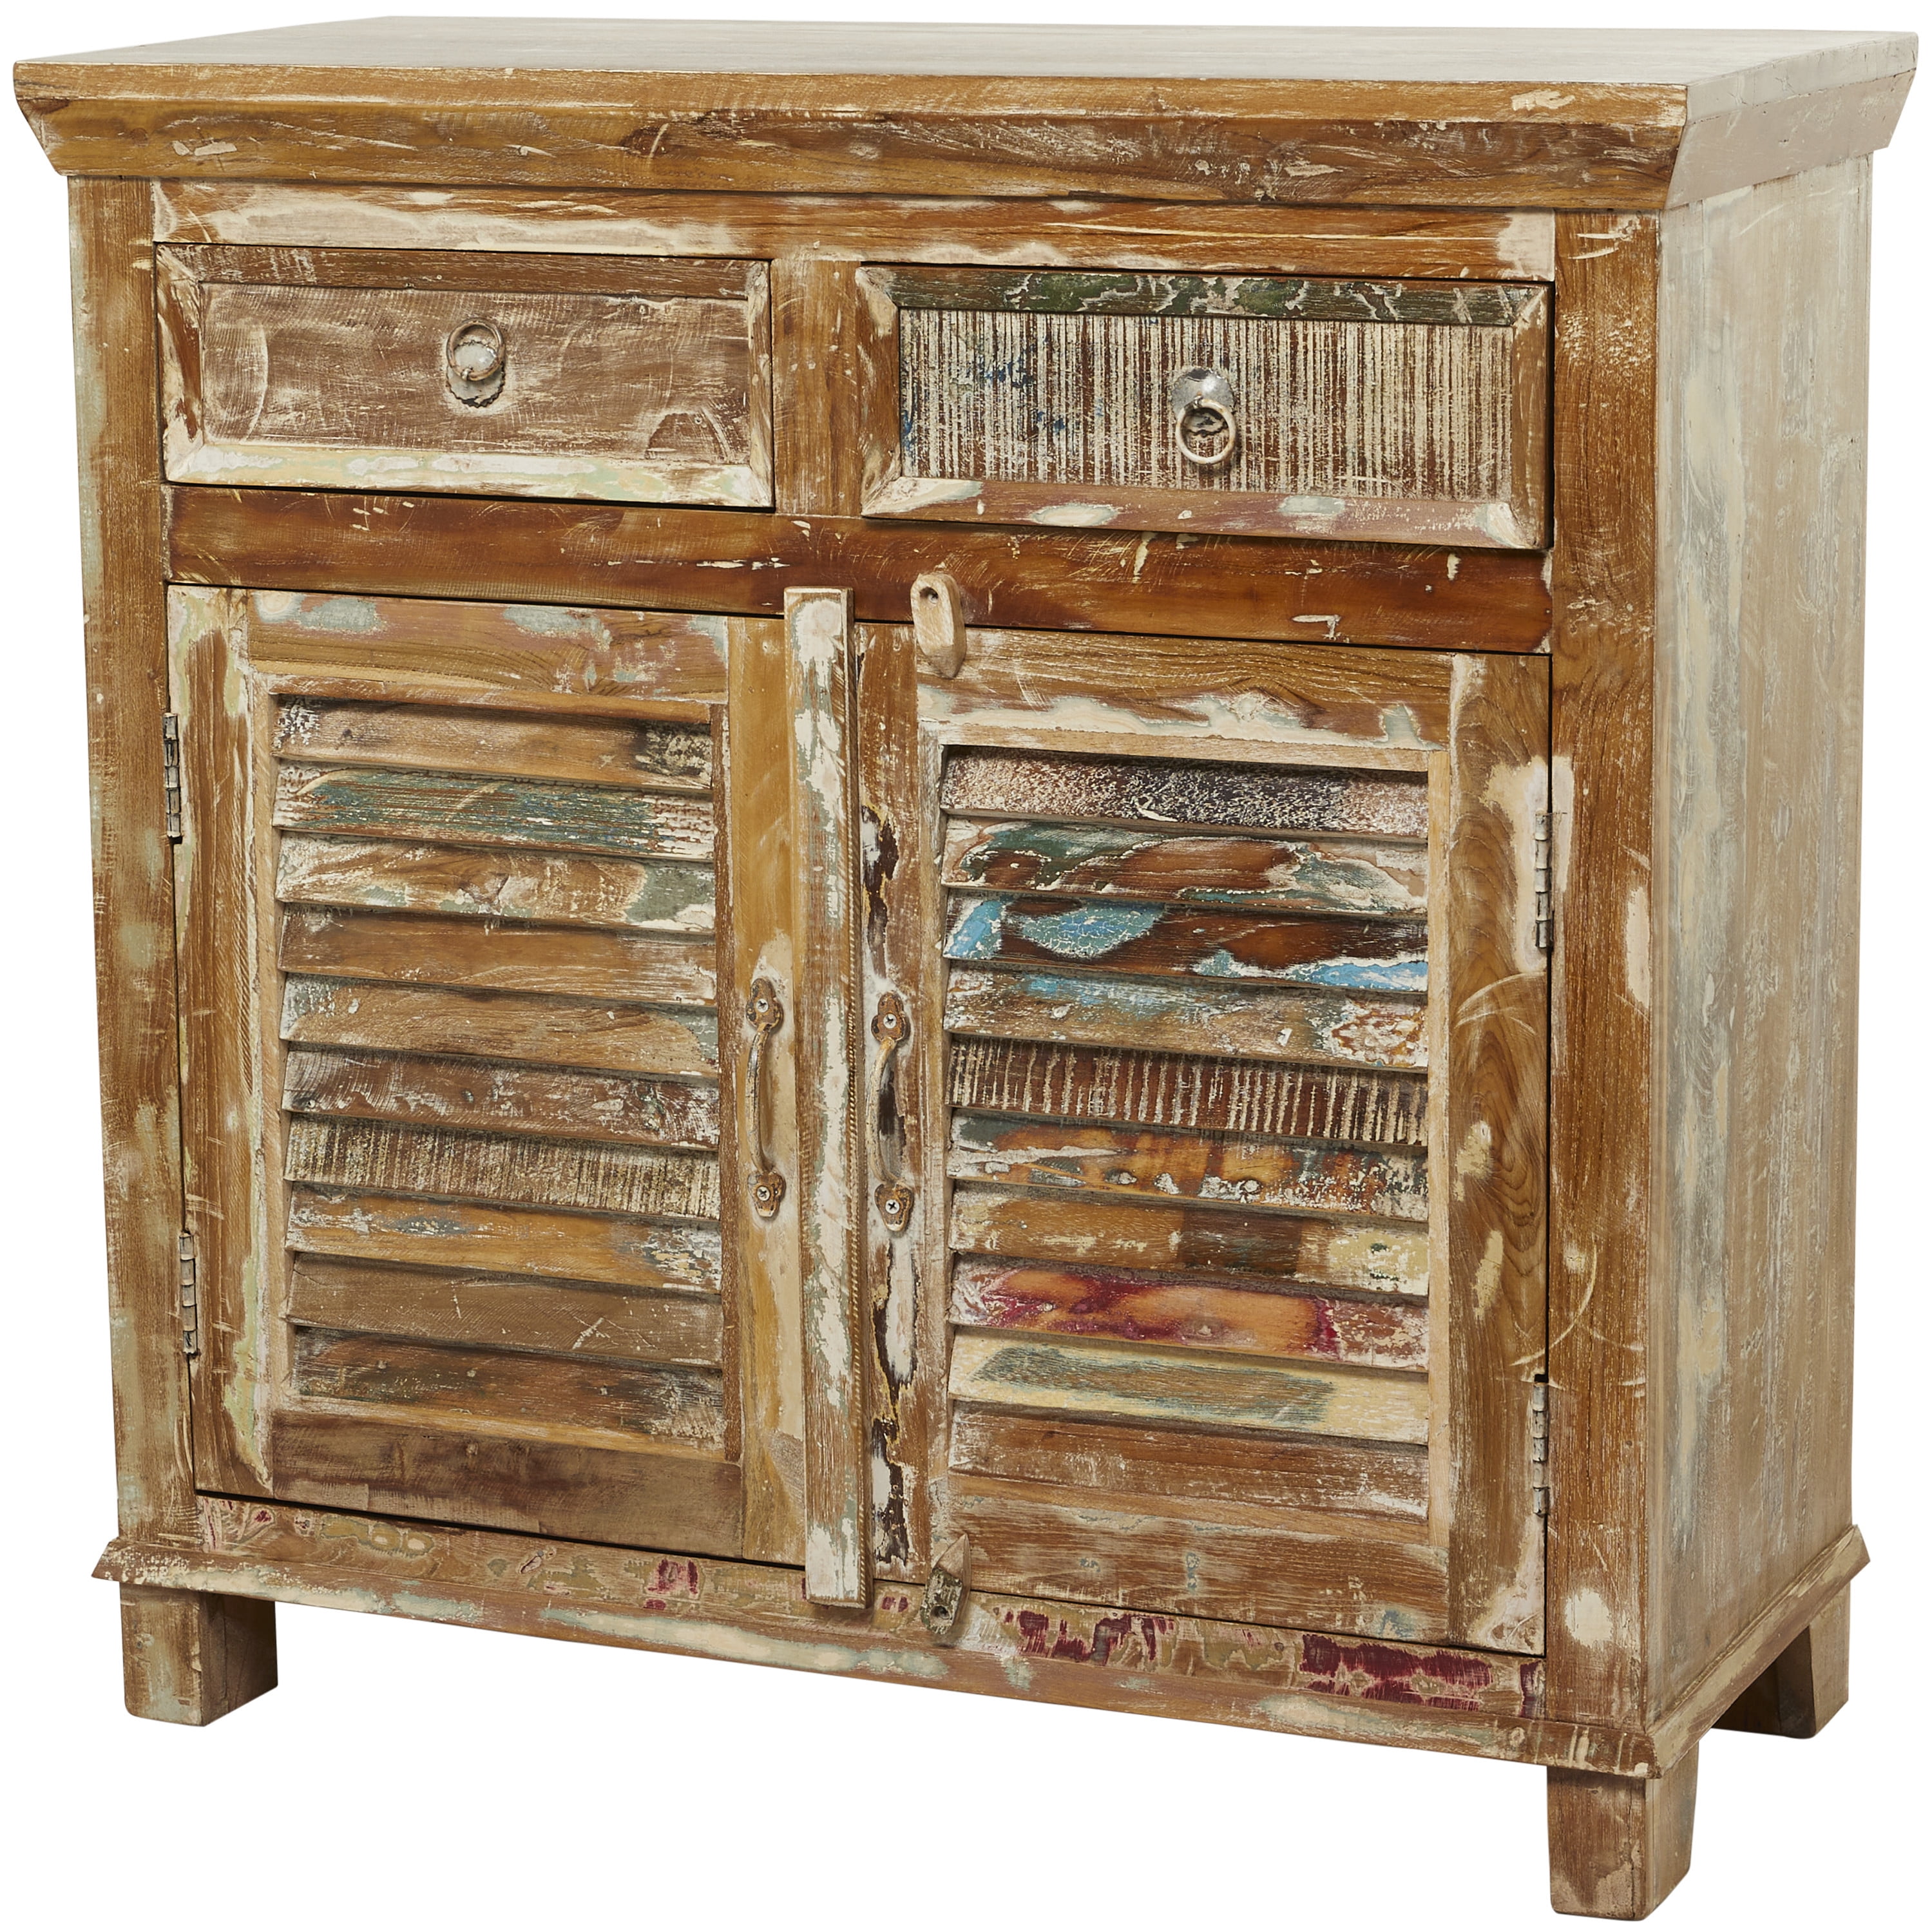 Small Painted Wood Cabinet with Drawers & Multi-Color Slat Door